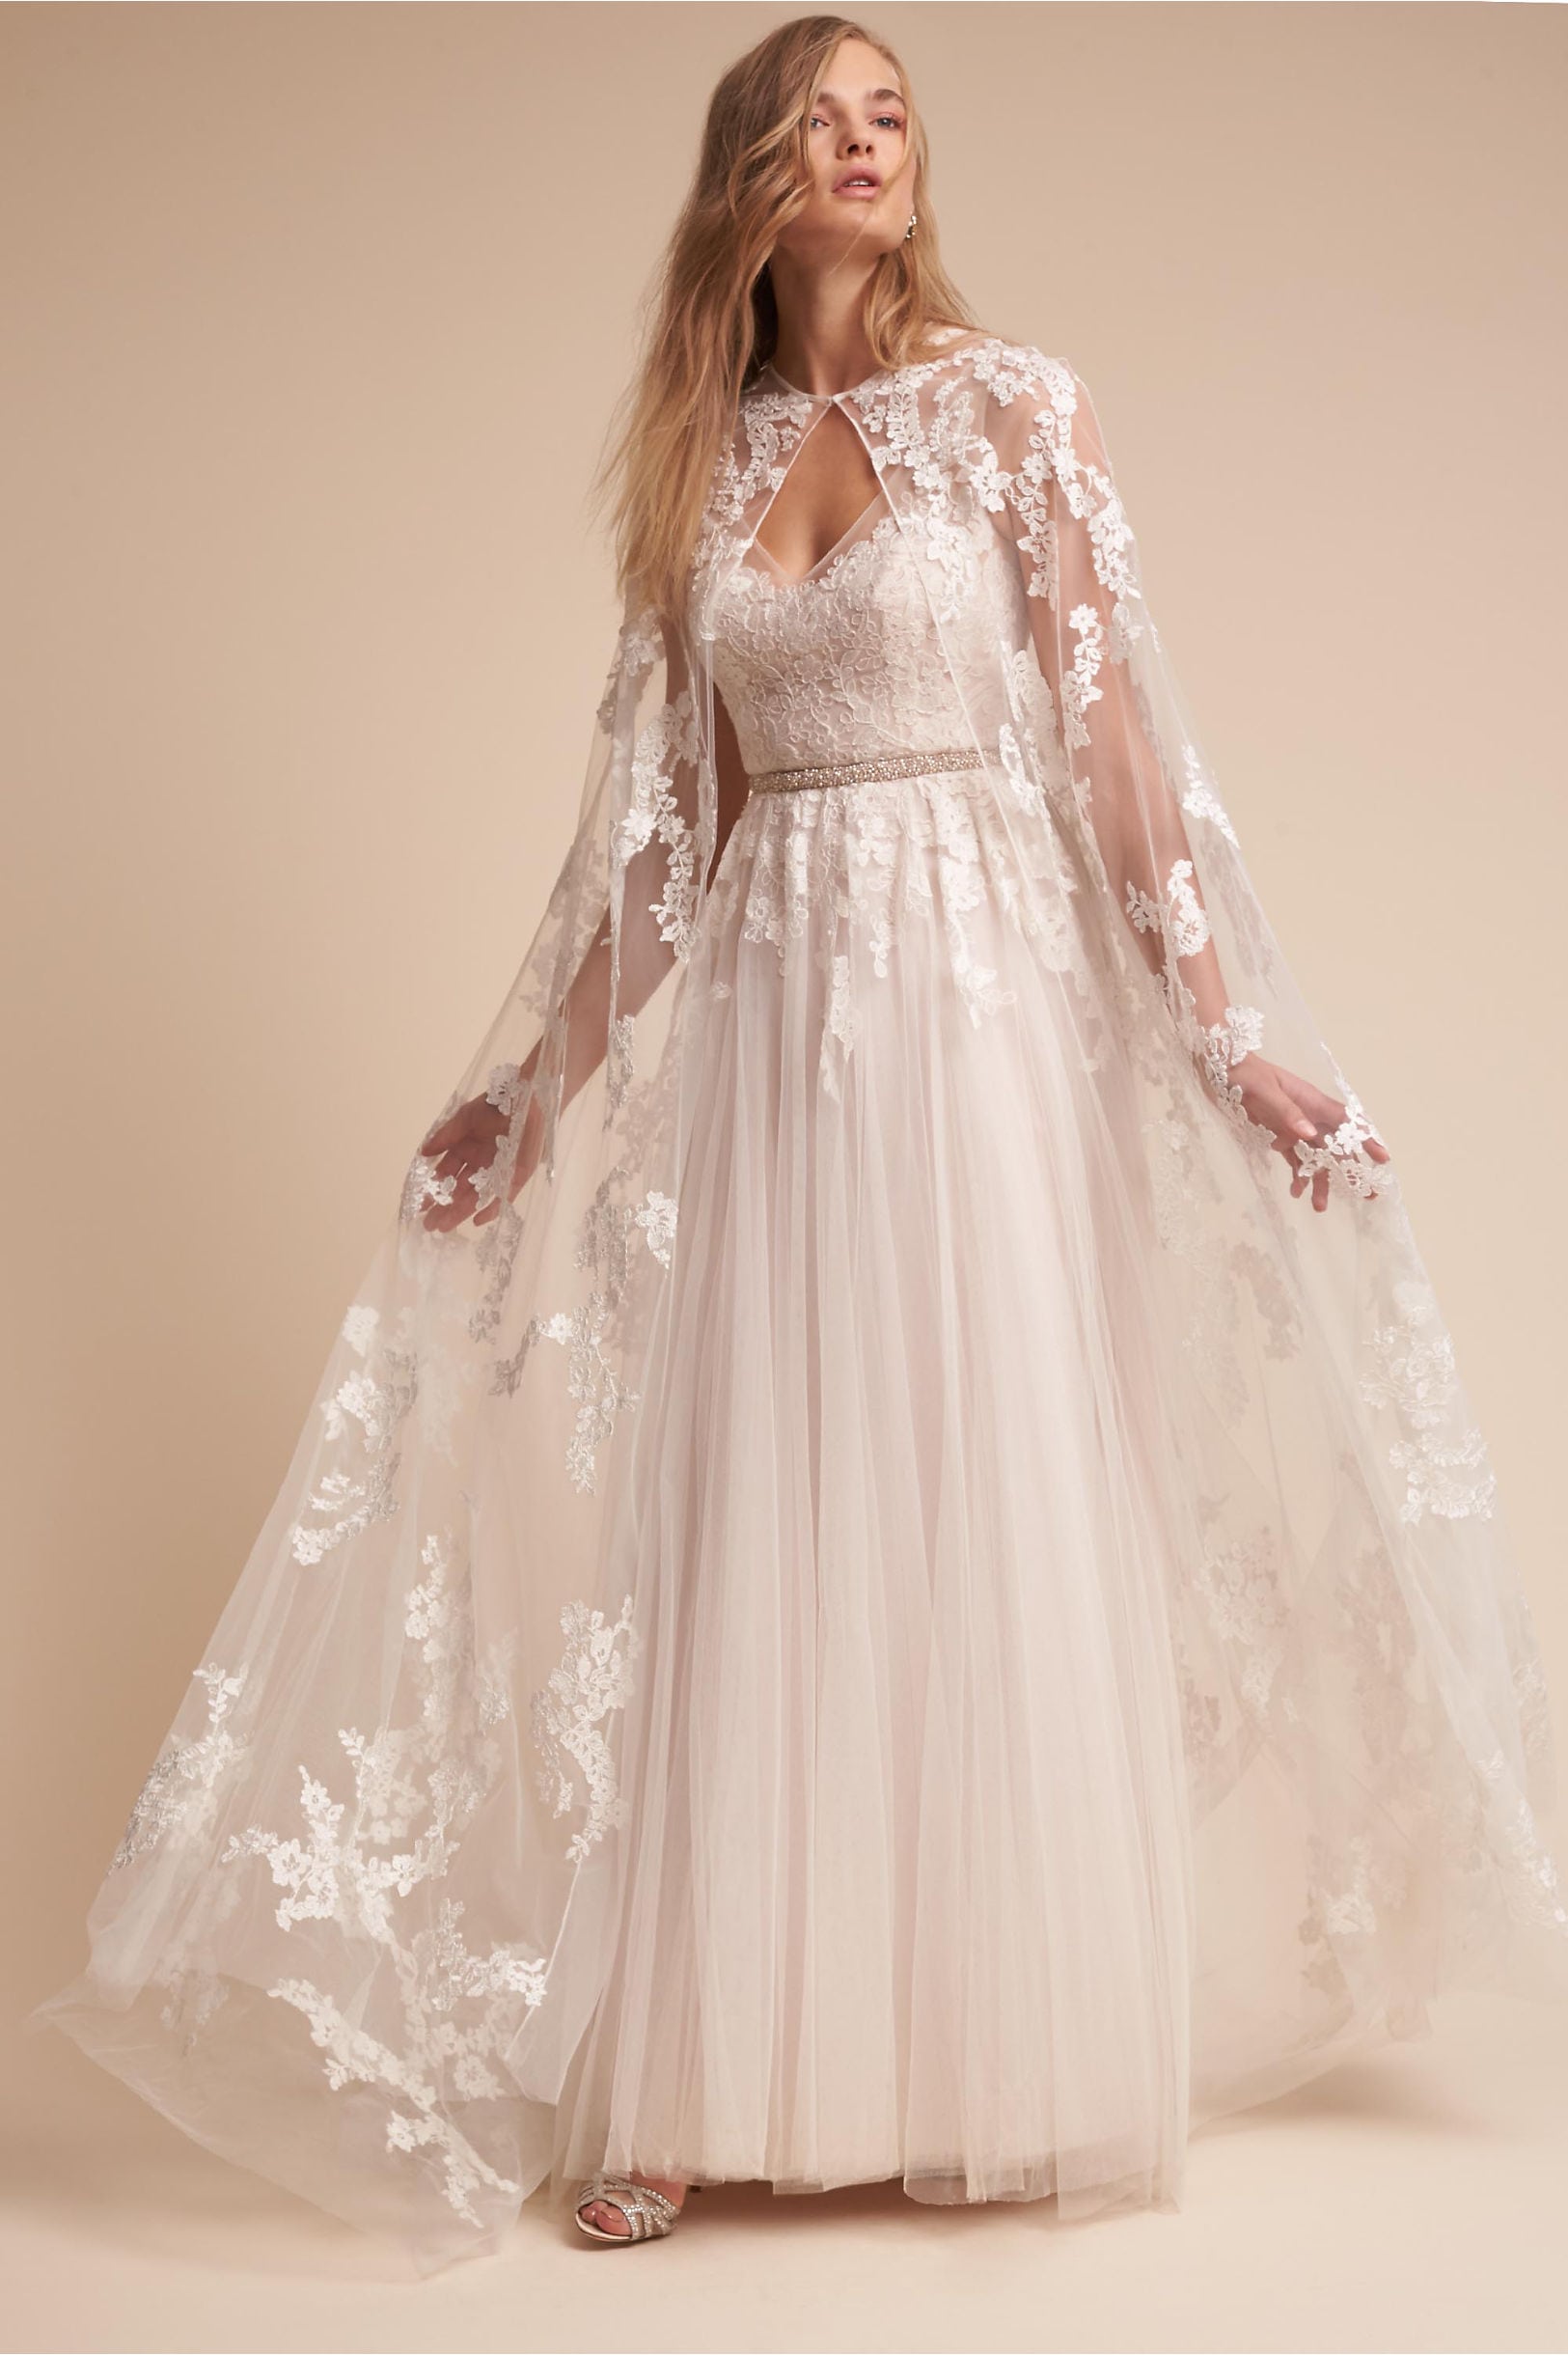 Blonde woman in lace cape and gown in tan room